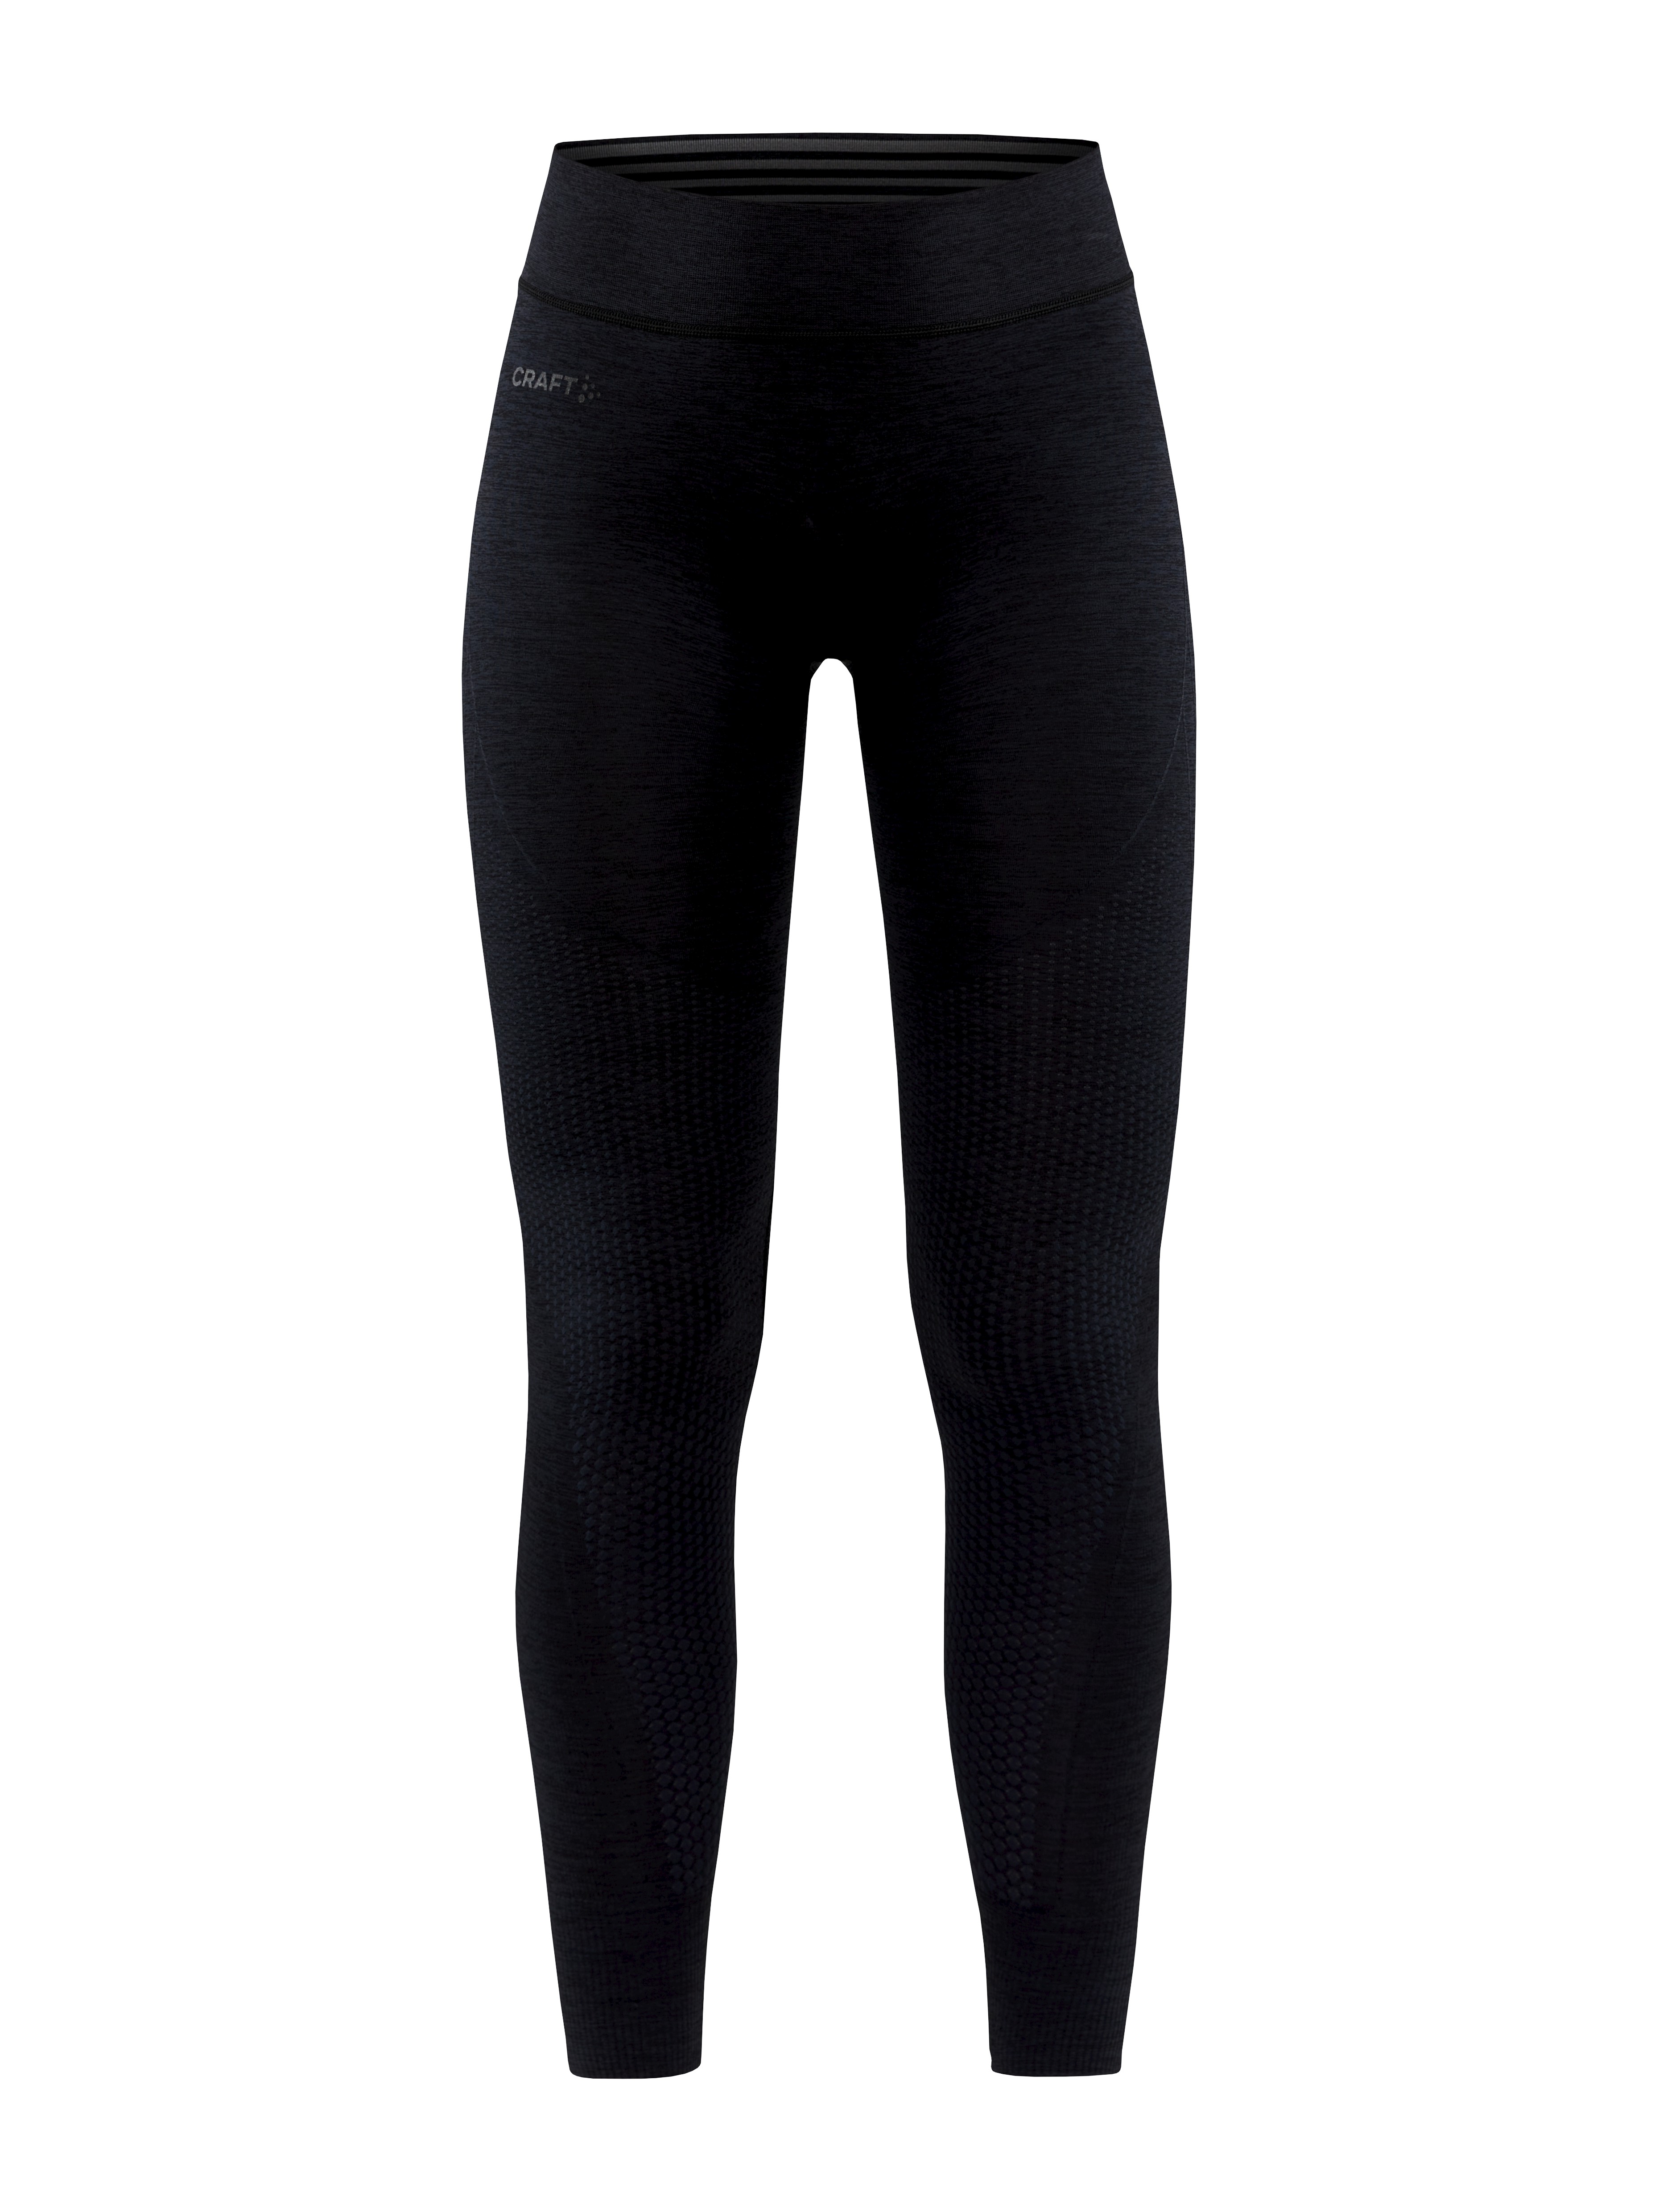 Leggings With Pockets for Women | Comfort & Style in One Package | Felina-thanhphatduhoc.com.vn